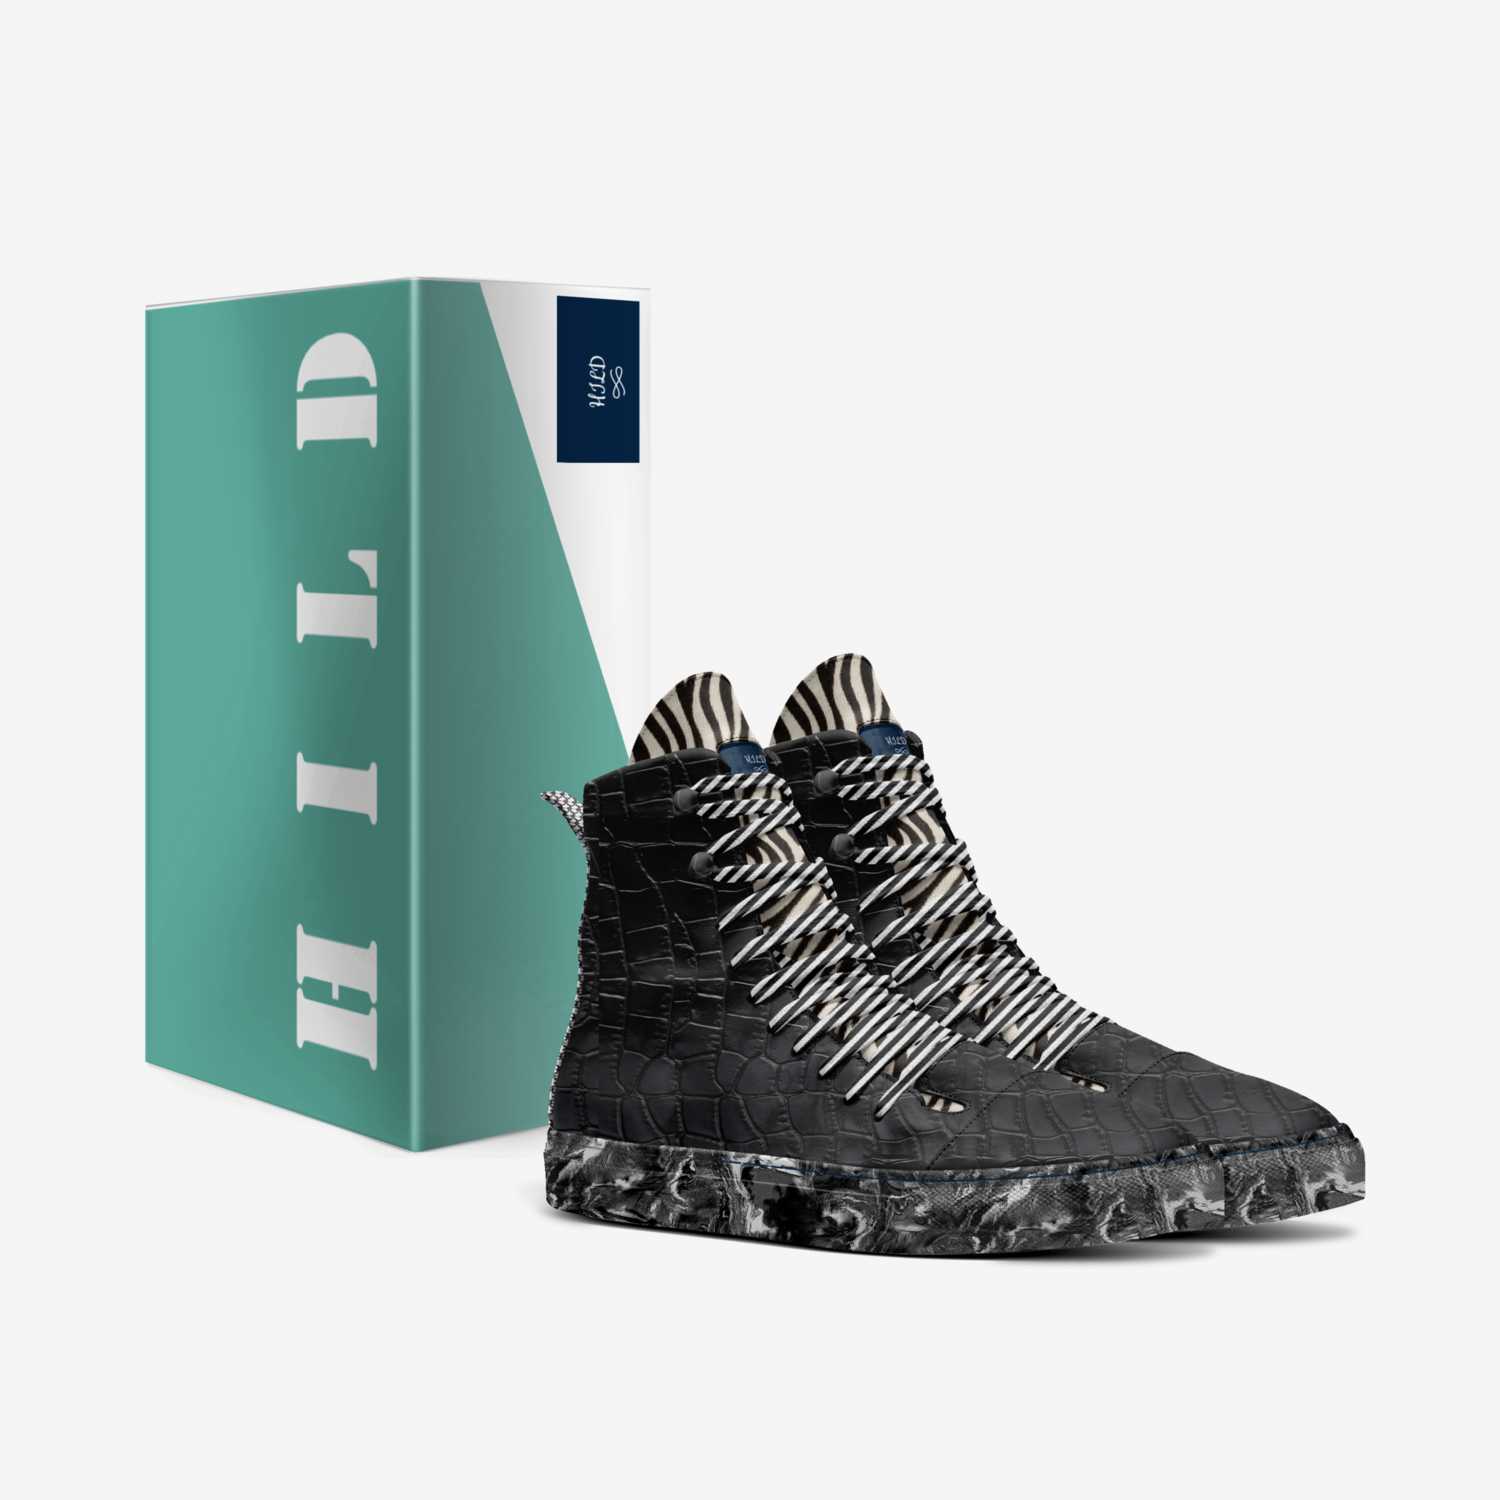 HILD custom made in Italy shoes by Abraham Joshua | Box view